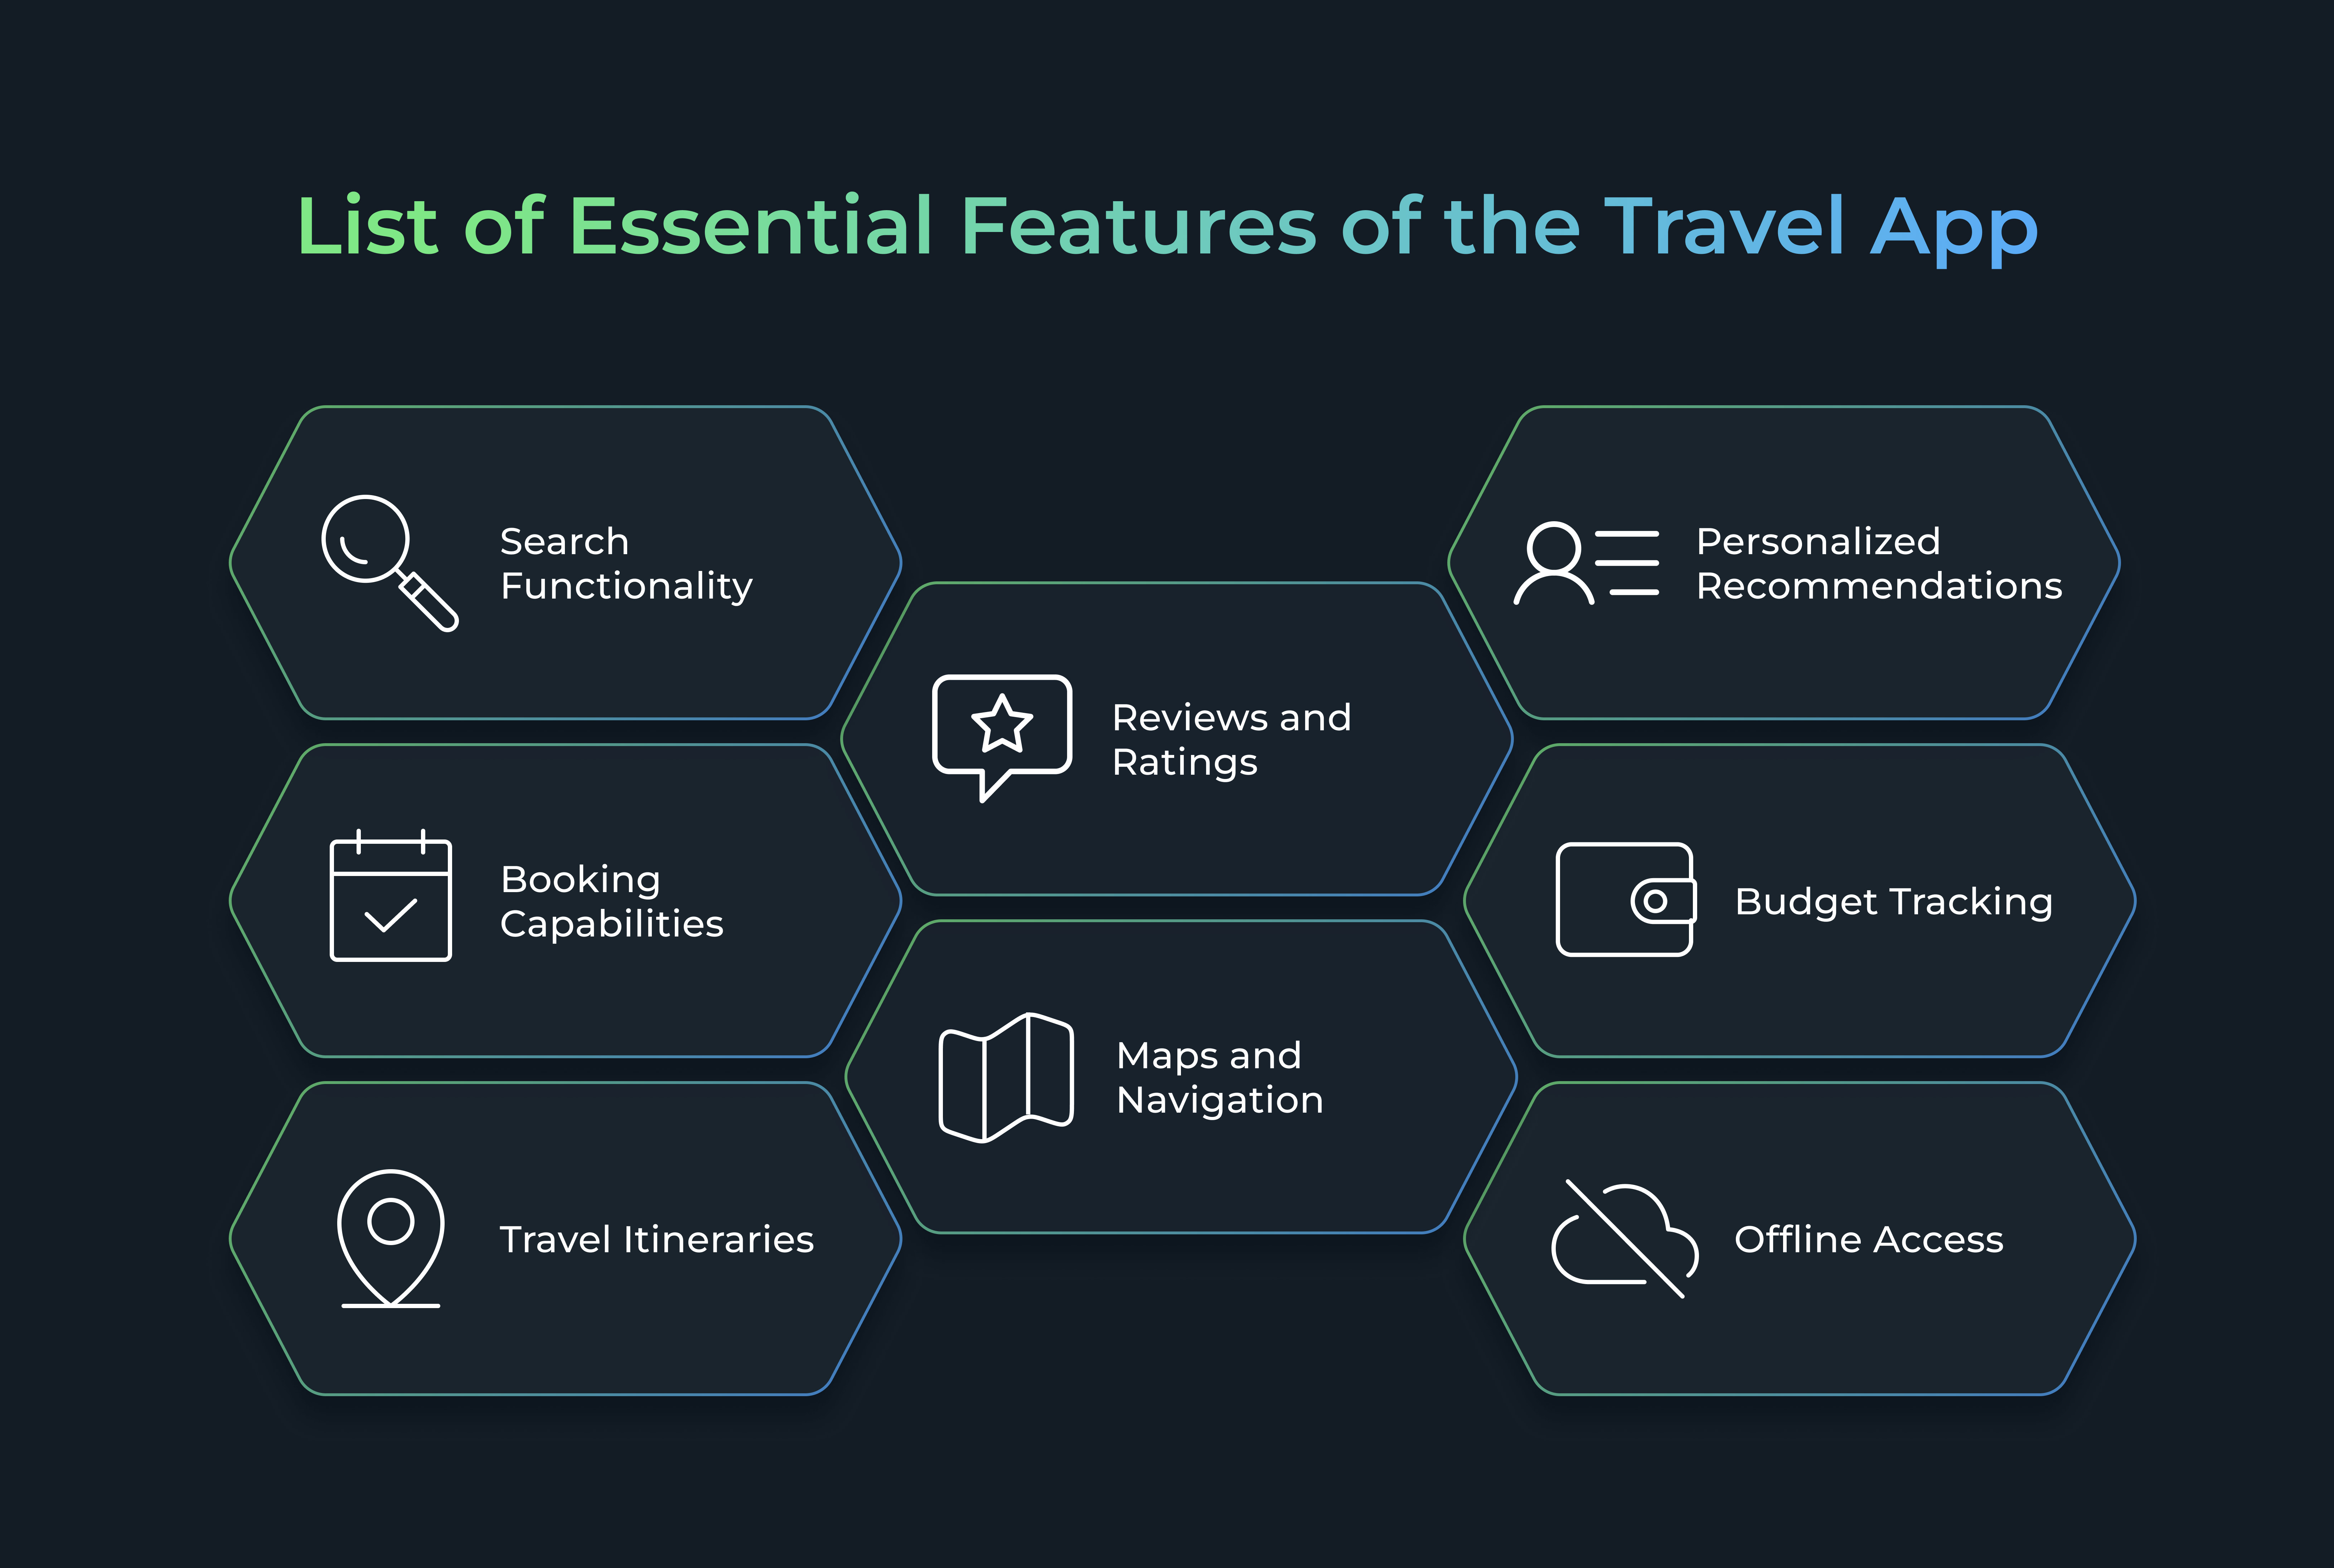 List of Essential Features of the Travel App: Search Functionality, Booking Capabilities, Travel Itineraries, Reviews and Ratings, Maps and Navigation, Personalized Recommendations, Budget Tracking, Offline Access
